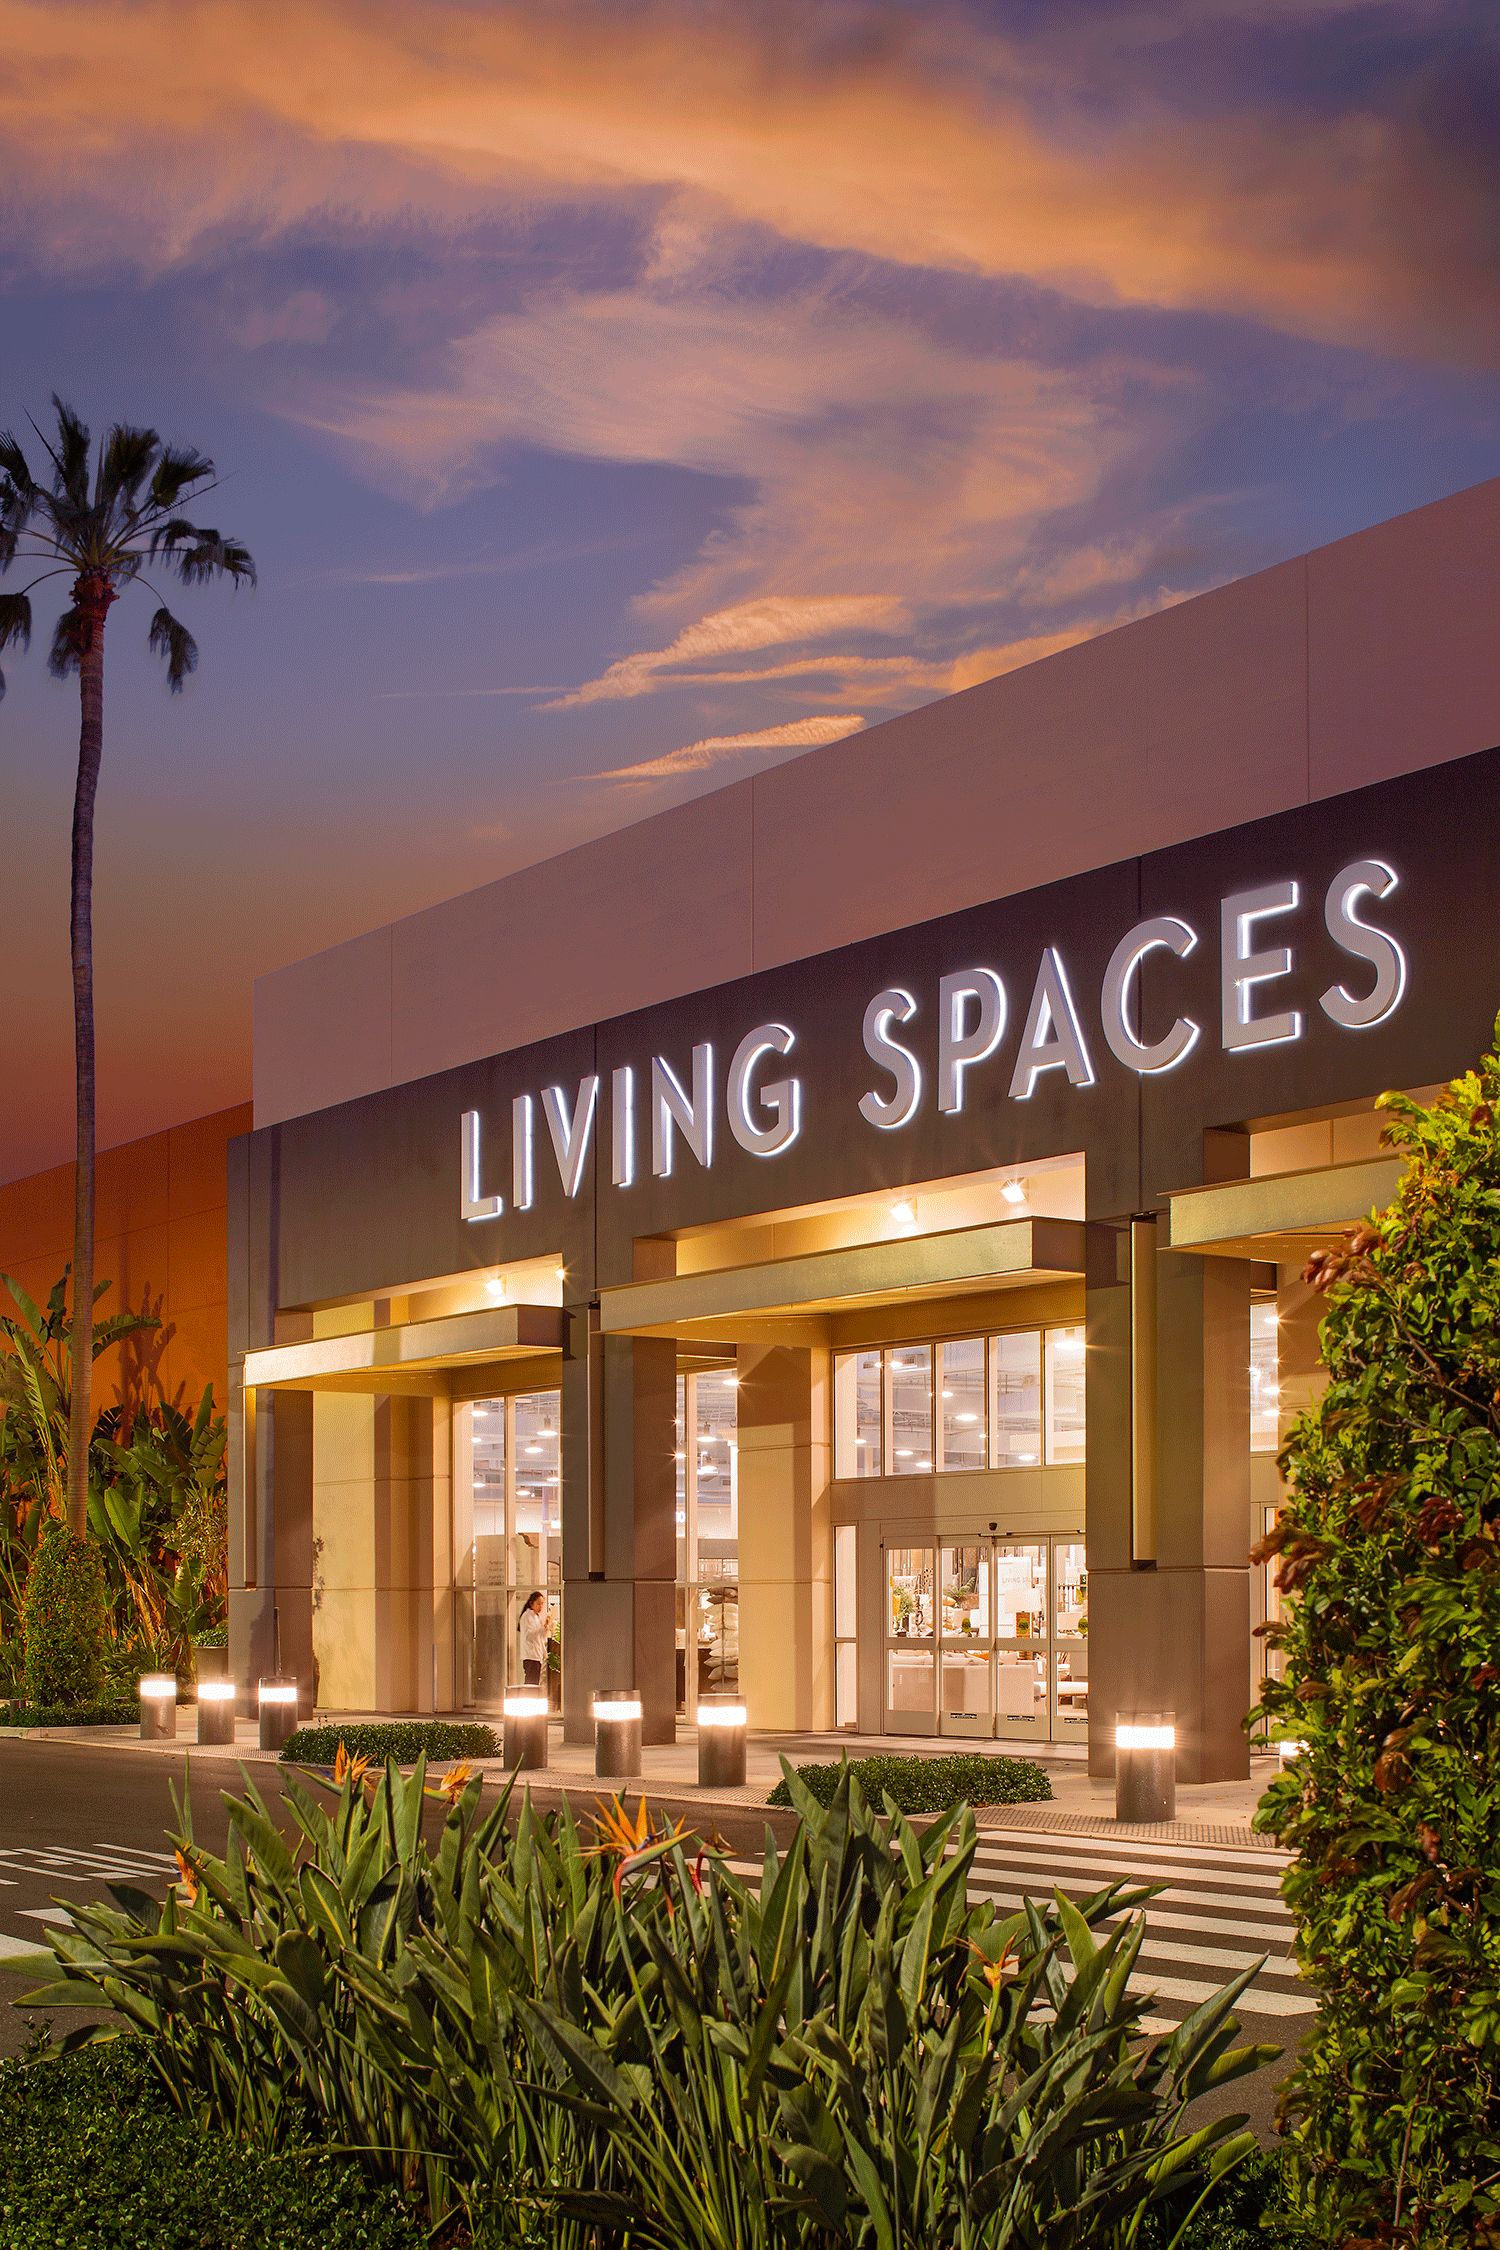  View of Living Spaces at dusk in Alton Marketplace | Irvine Spectrum®